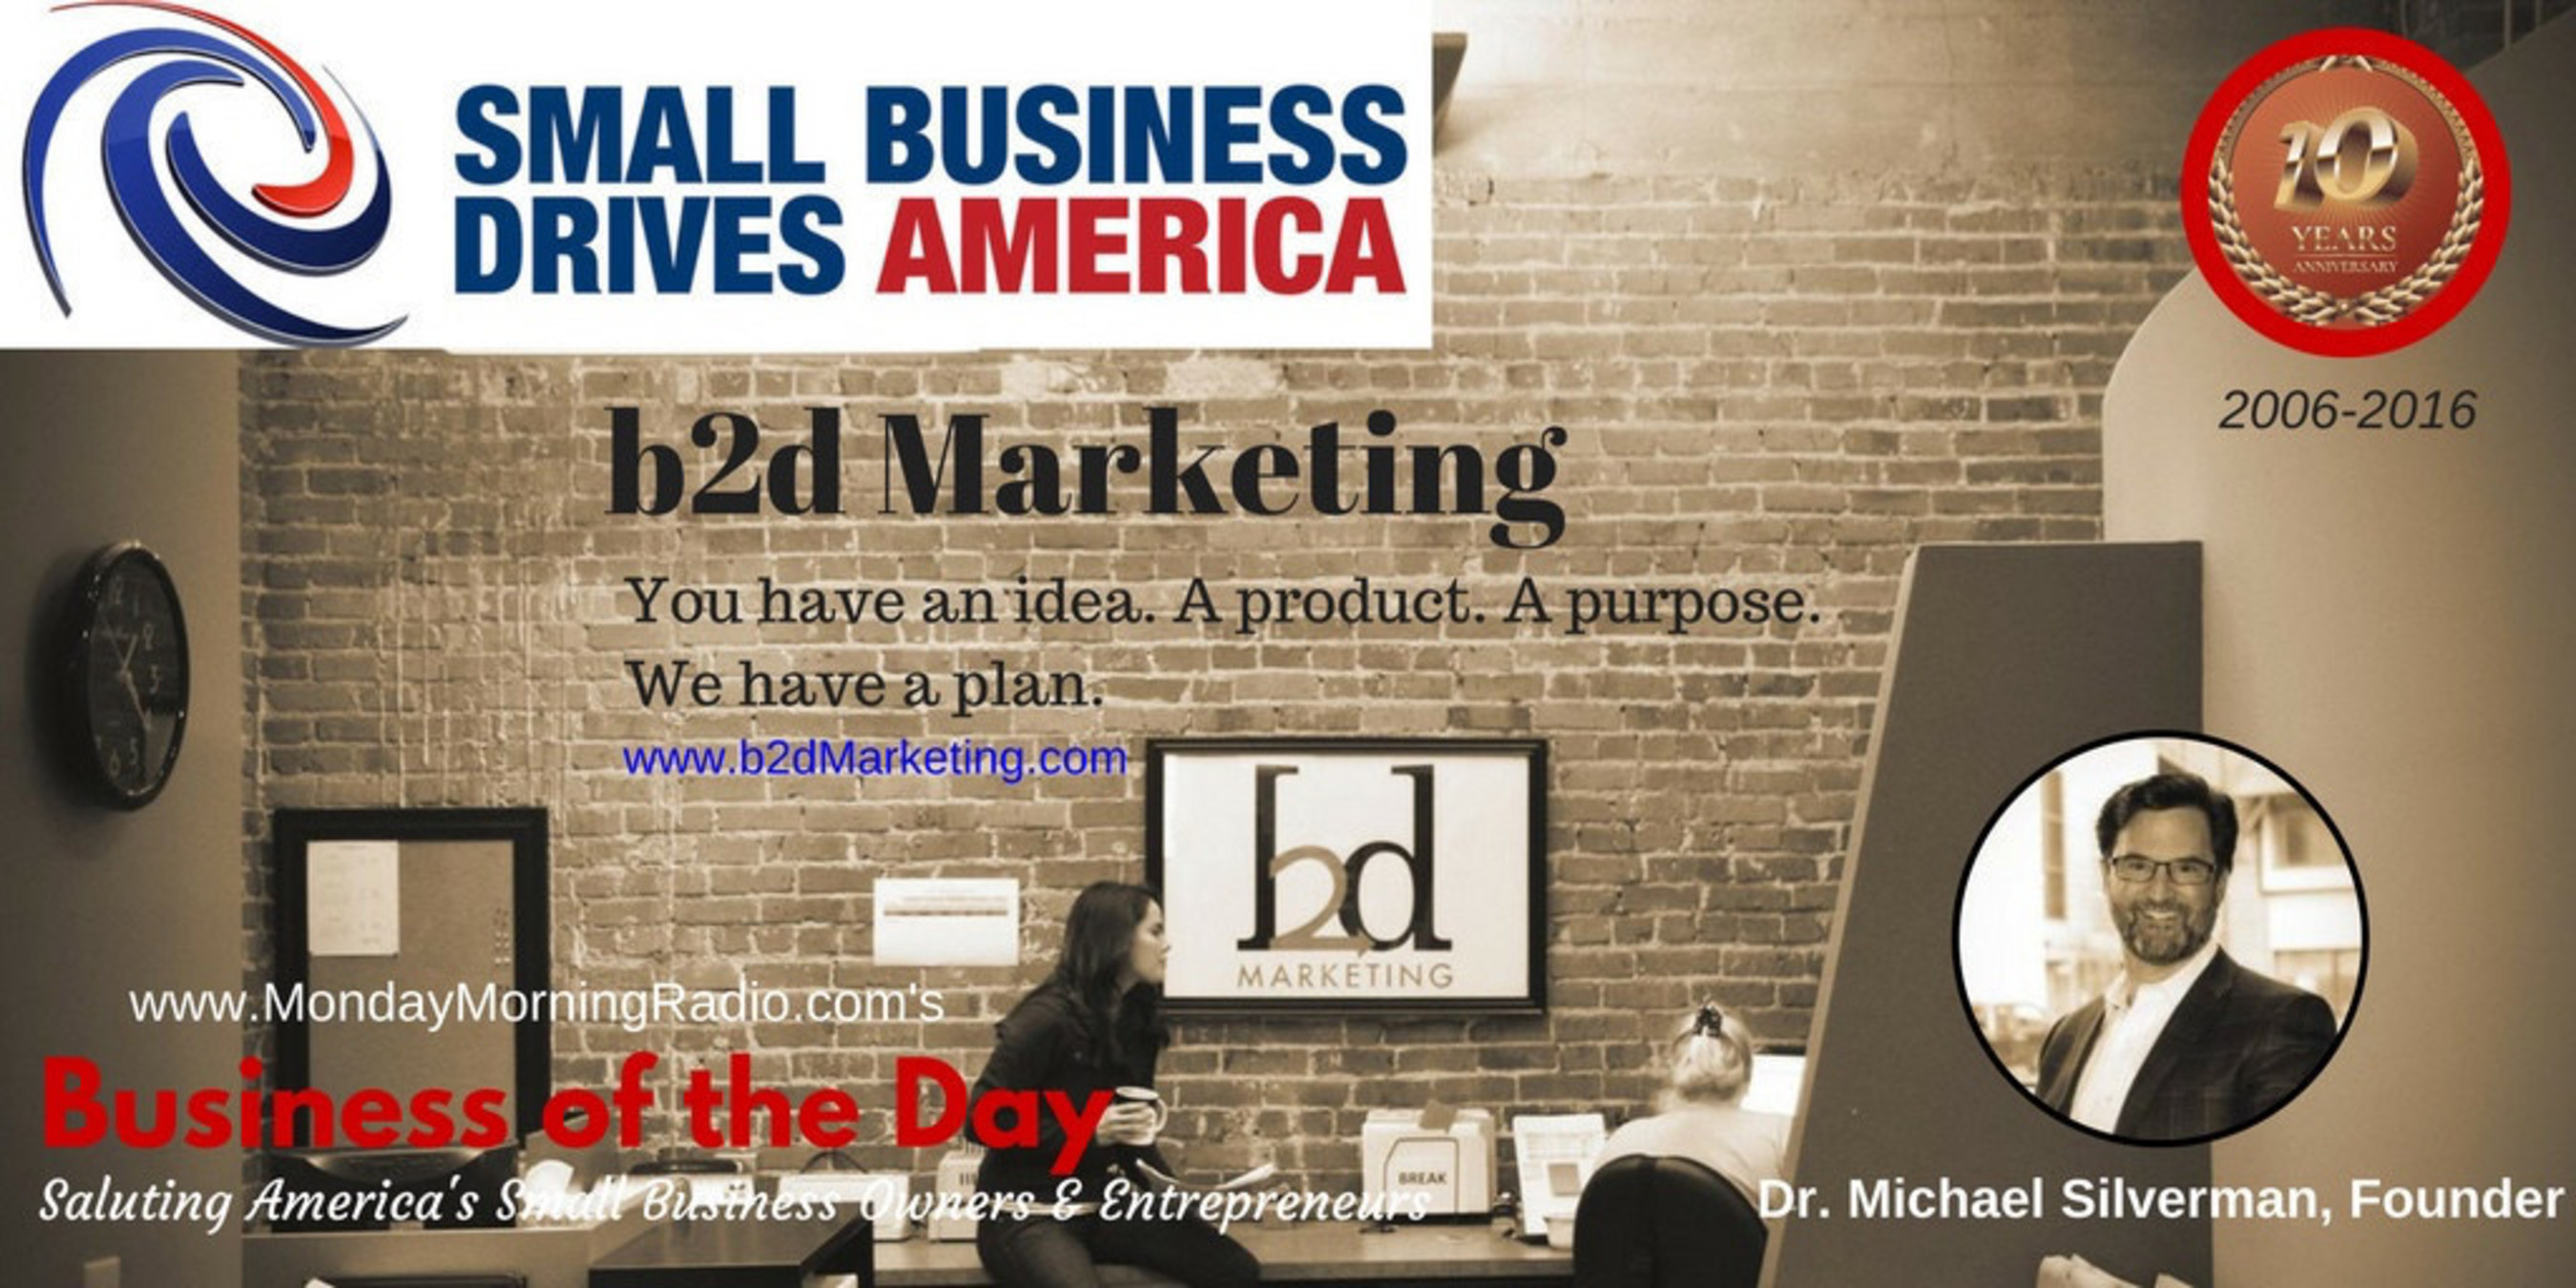 Small Business Drives America(TM) salutes model small business owners and entrepreneurs.